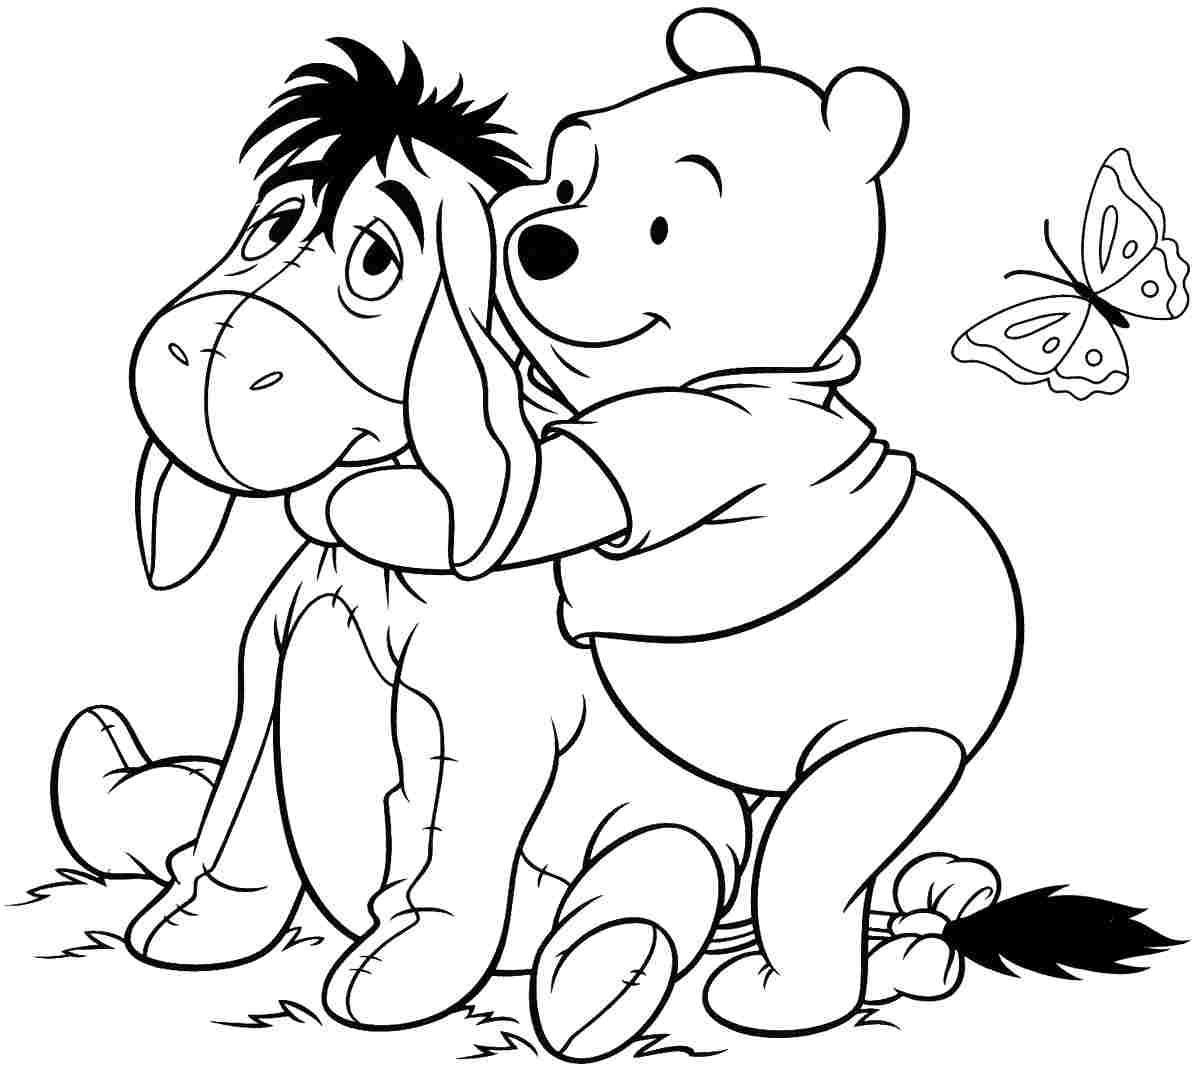 Winnie The Pooh Coloring Pages Pdf at GetColorings com Free printable